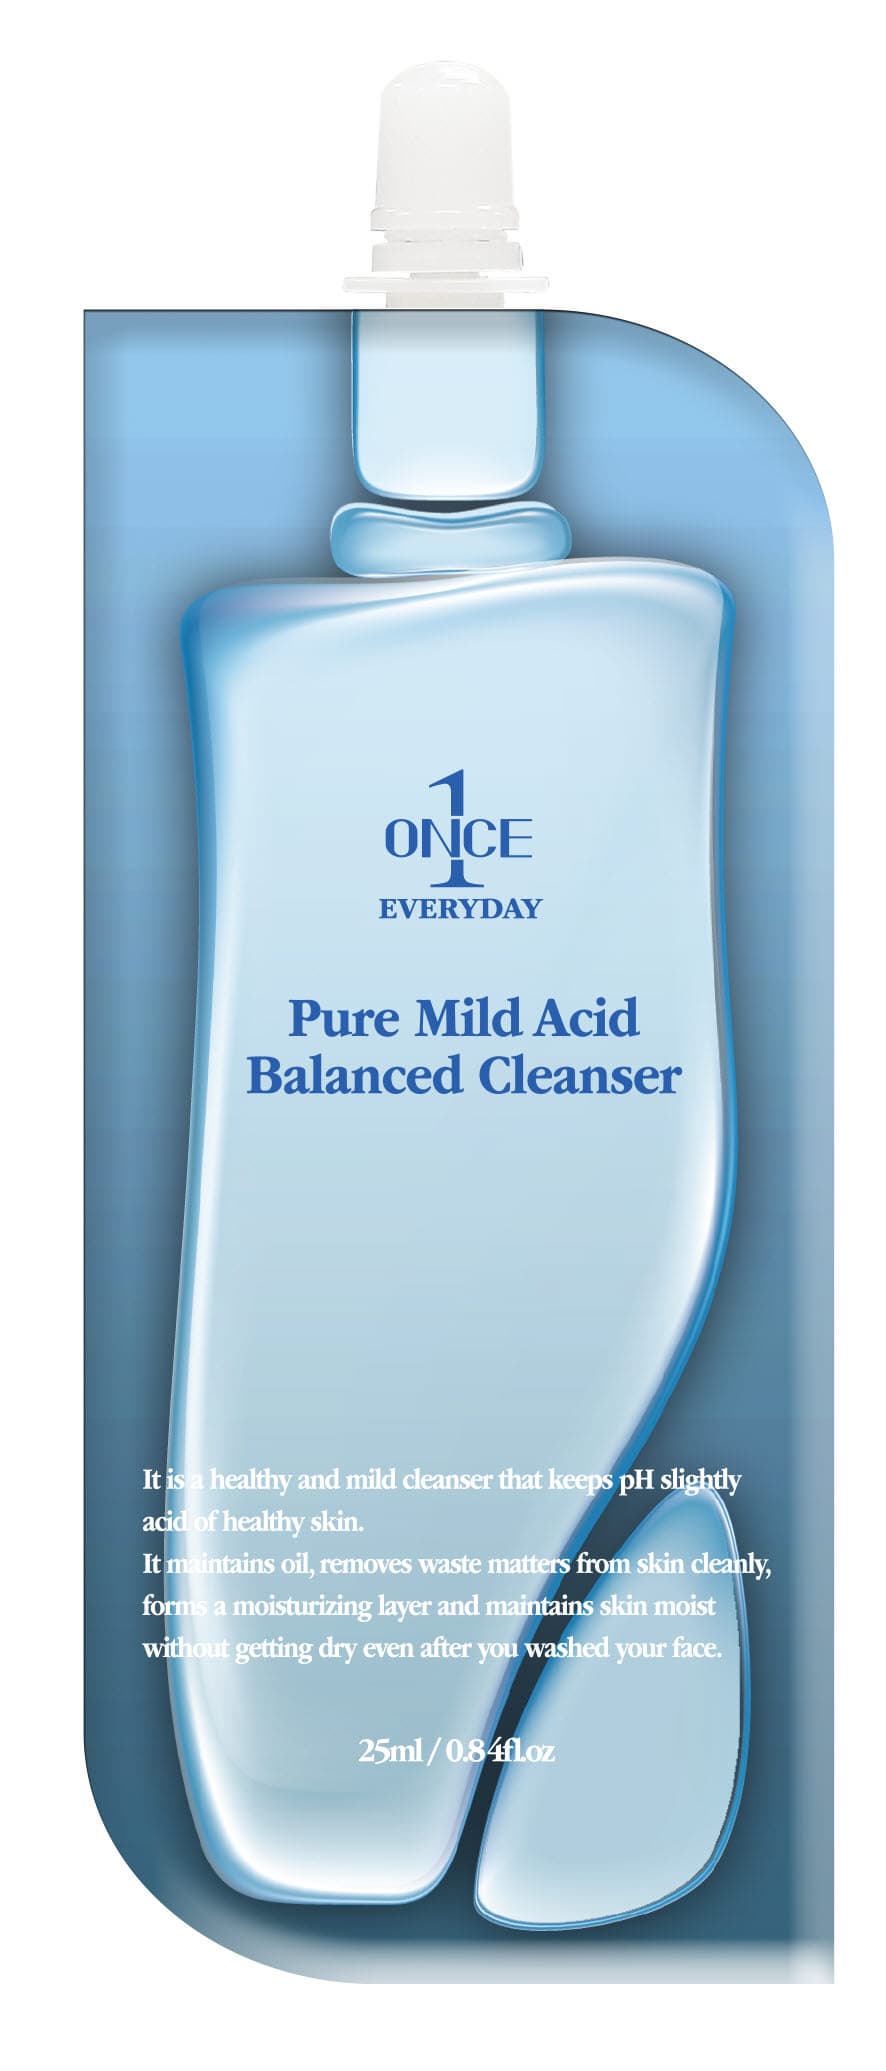 Once Everyday Pure Mild Acid Balanced Cleanser